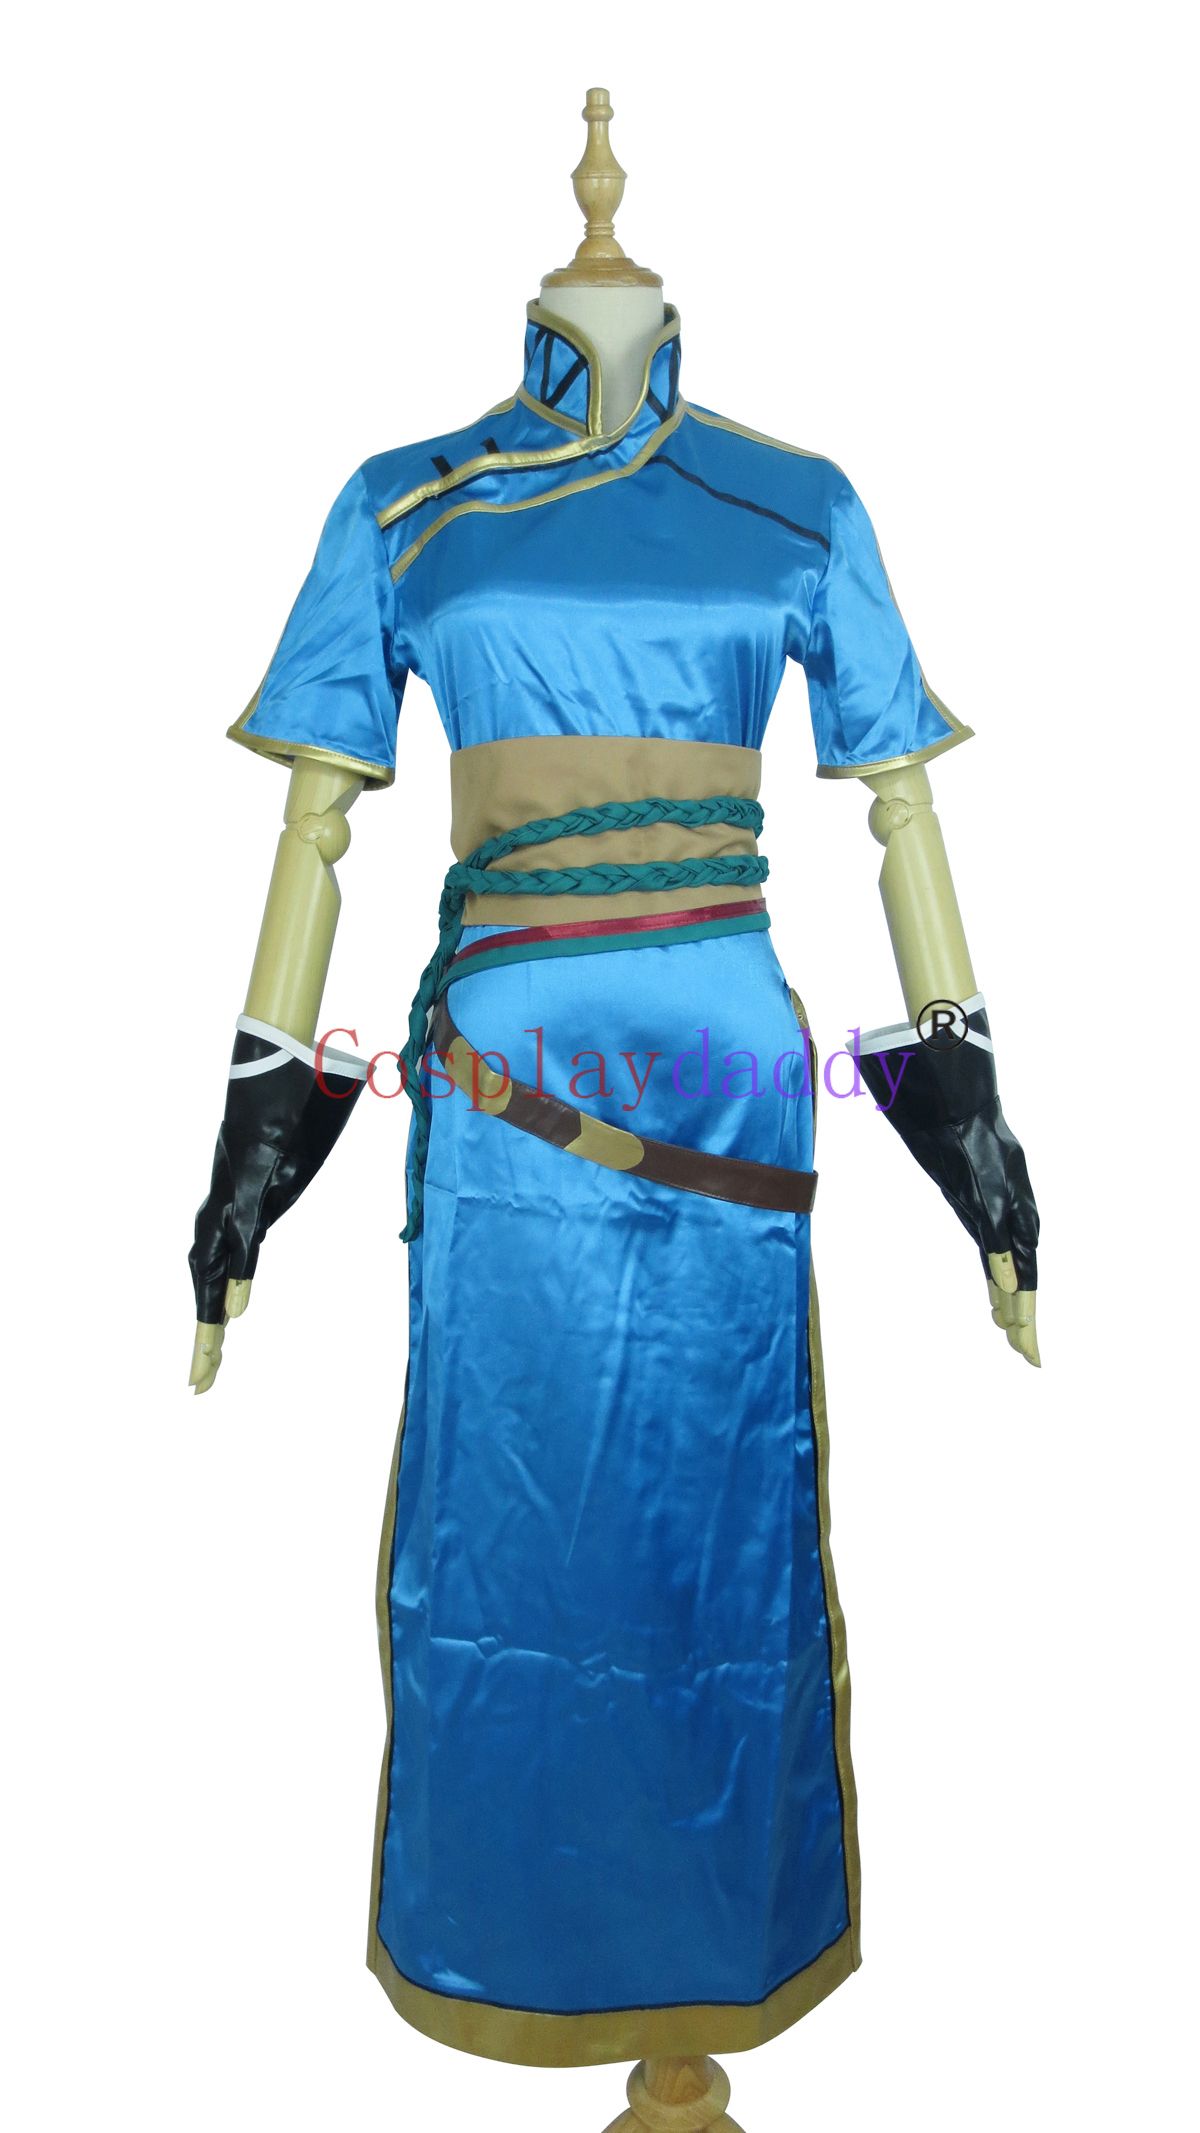 Fire Emblem Rekka No Ken Lyndis Lyn Cosplay Costume E001 Anime Girl Outfits Cosplay Shop Online From Lisacosplay 65 99 Dhgate Com